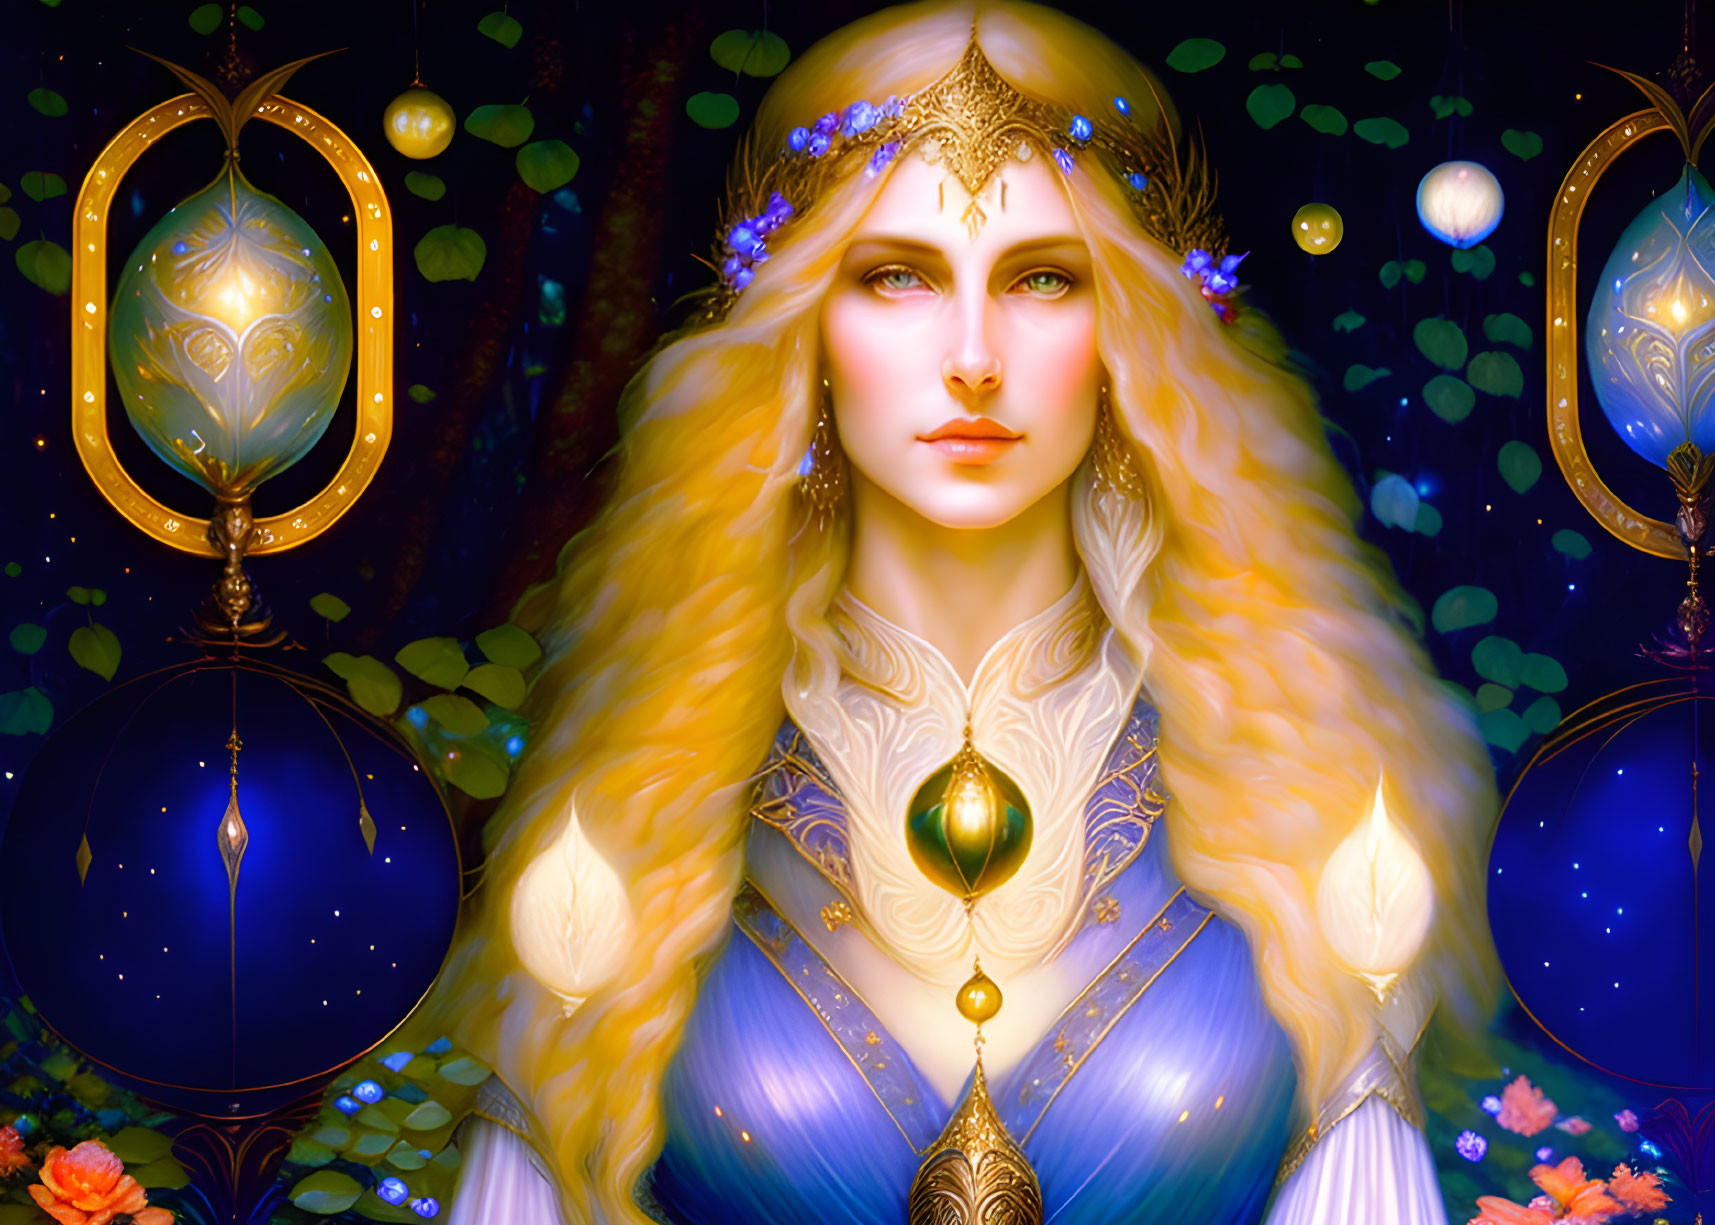 Fantastical regal woman with blonde hair and golden diadem in glowing lanterns backdrop